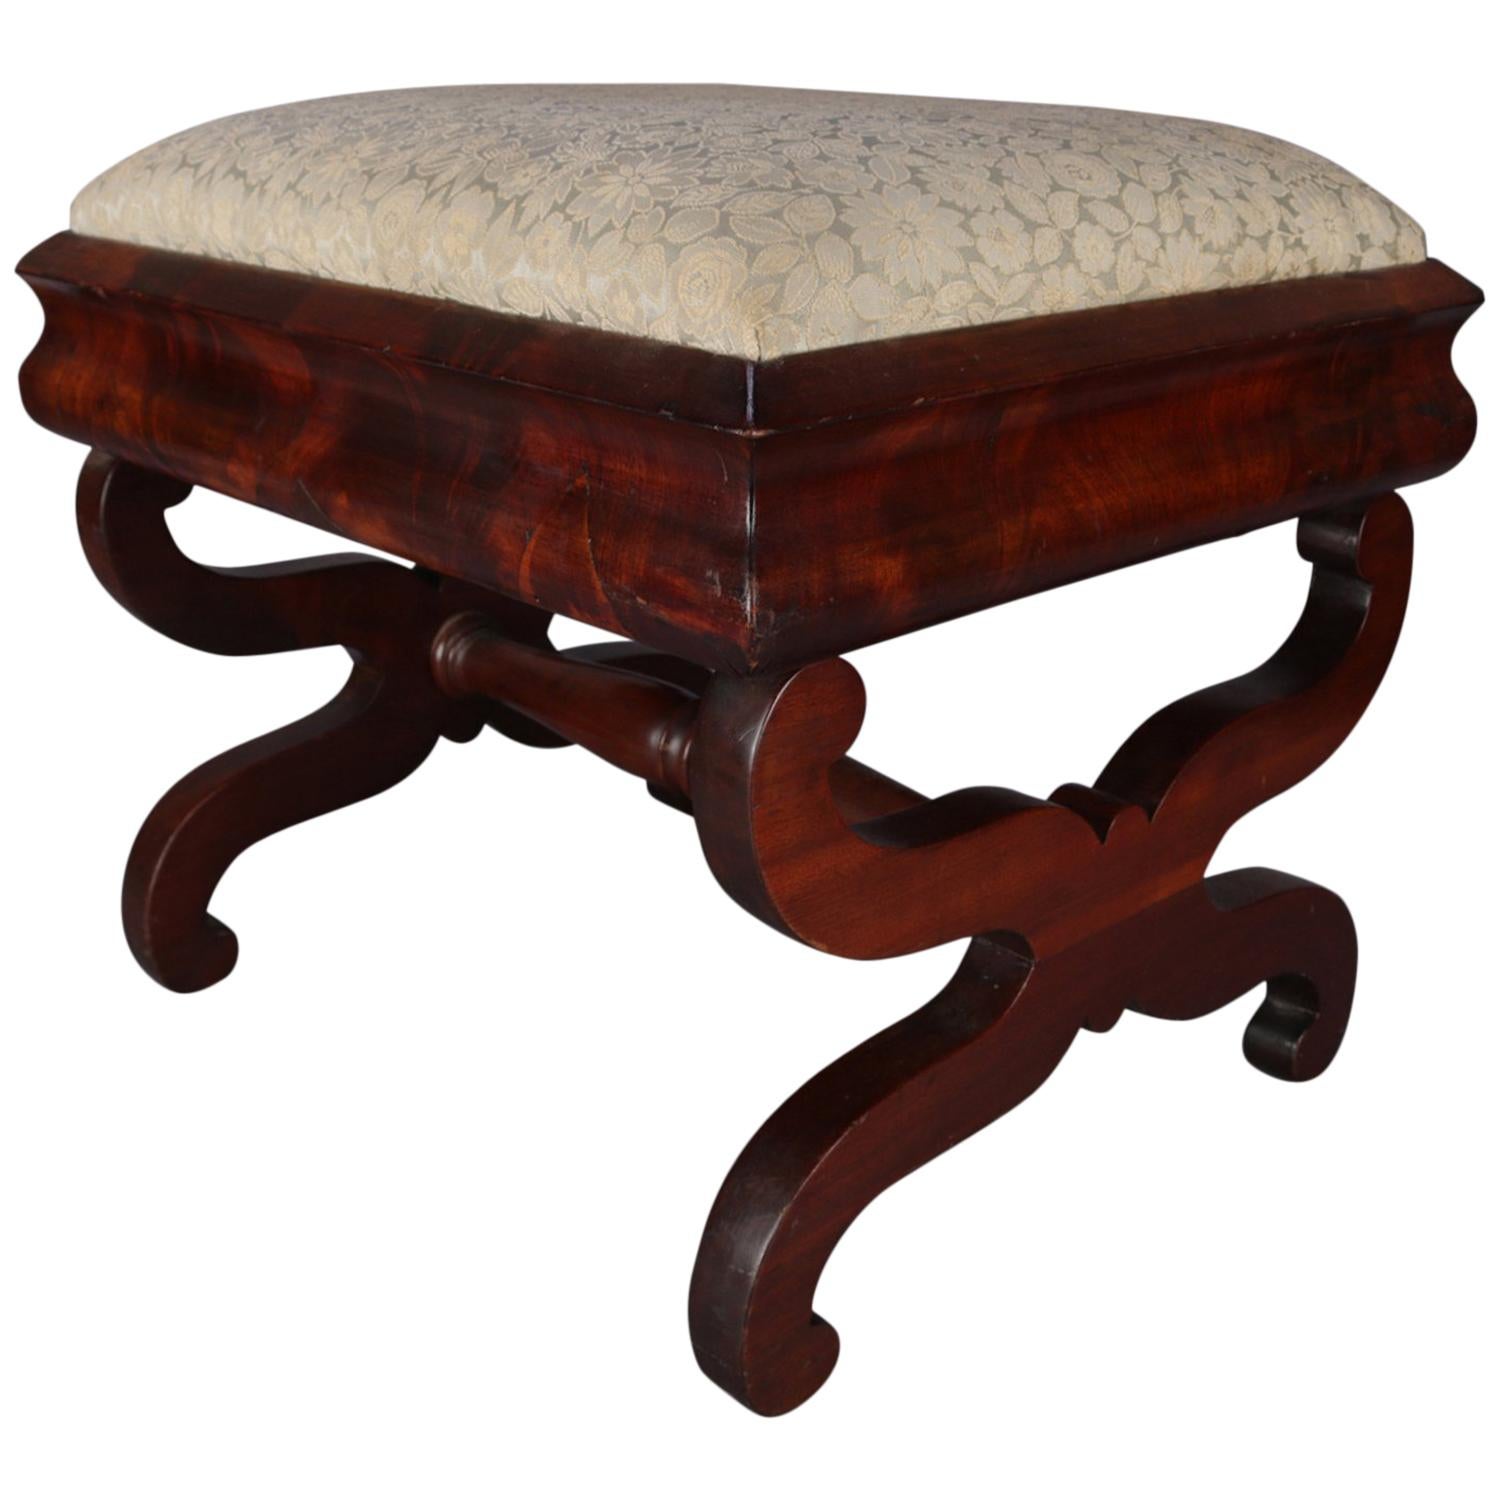 Antique American Empire Flame Mahogany Ogee Upholstered Footstool, circa 1840